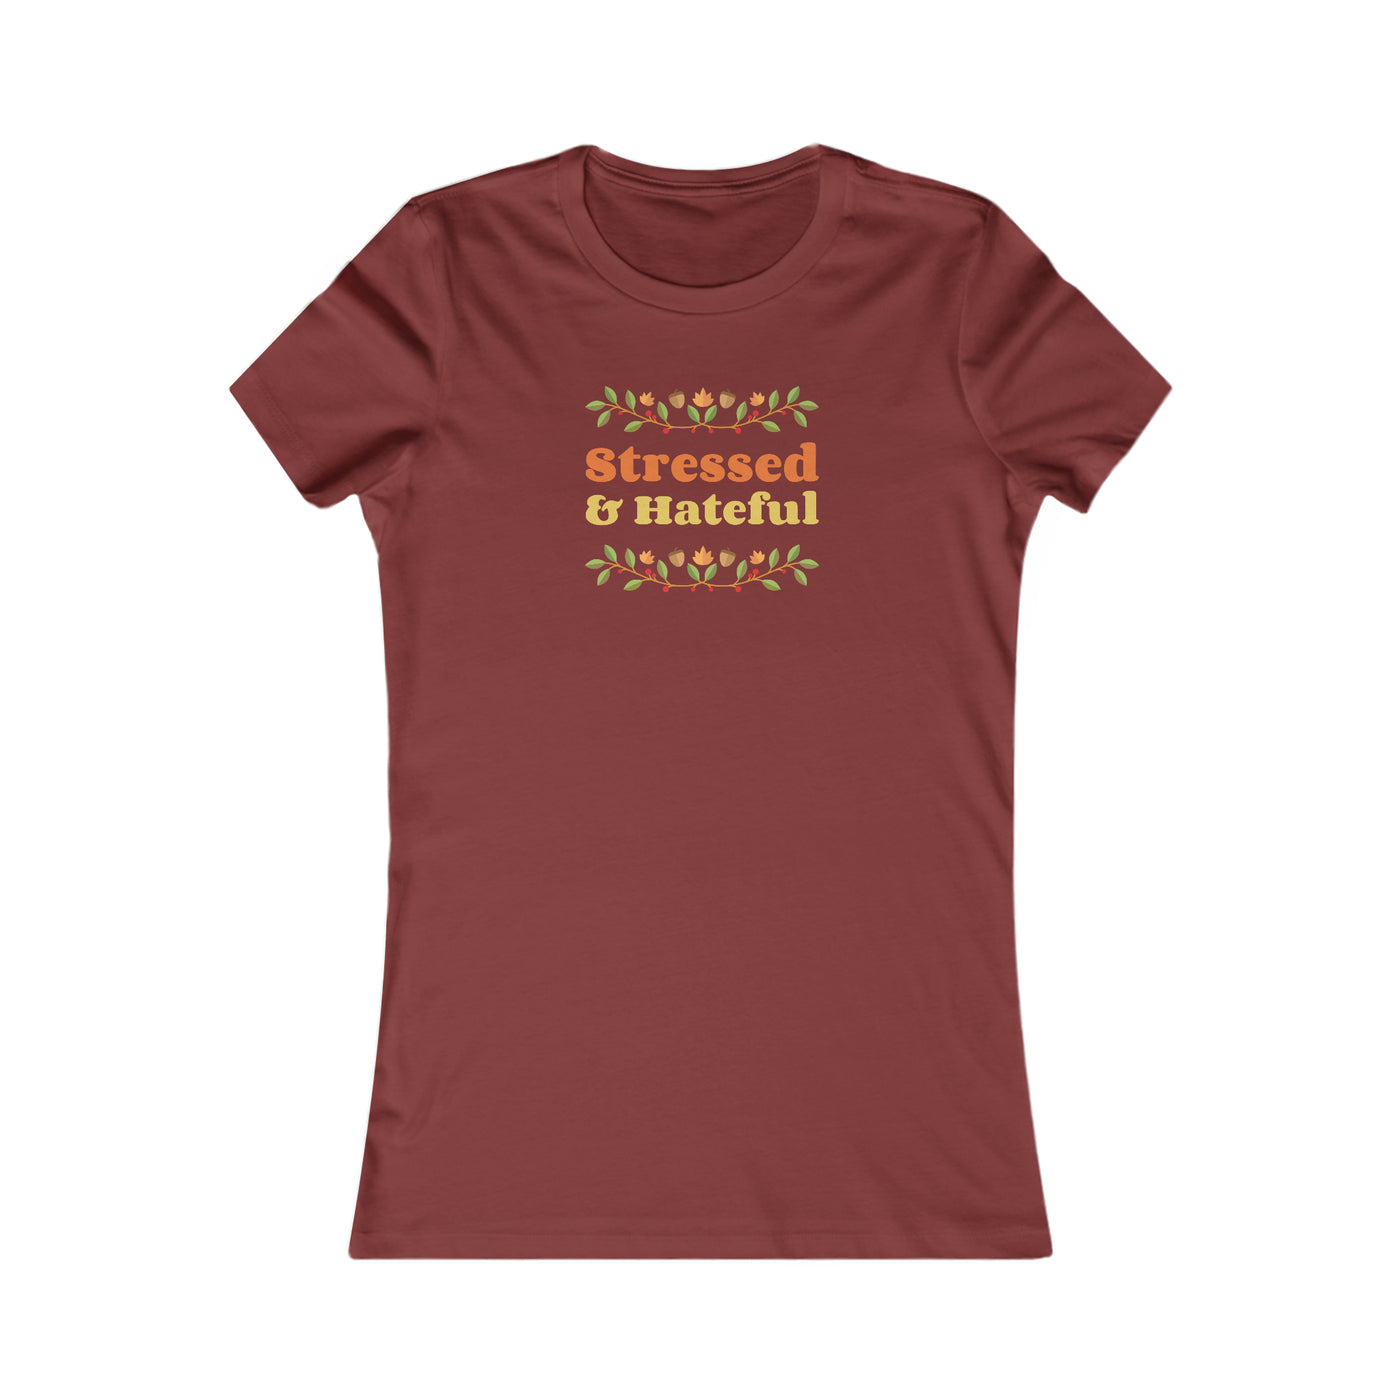 Stressed and Hateful Women's Favorite Tee